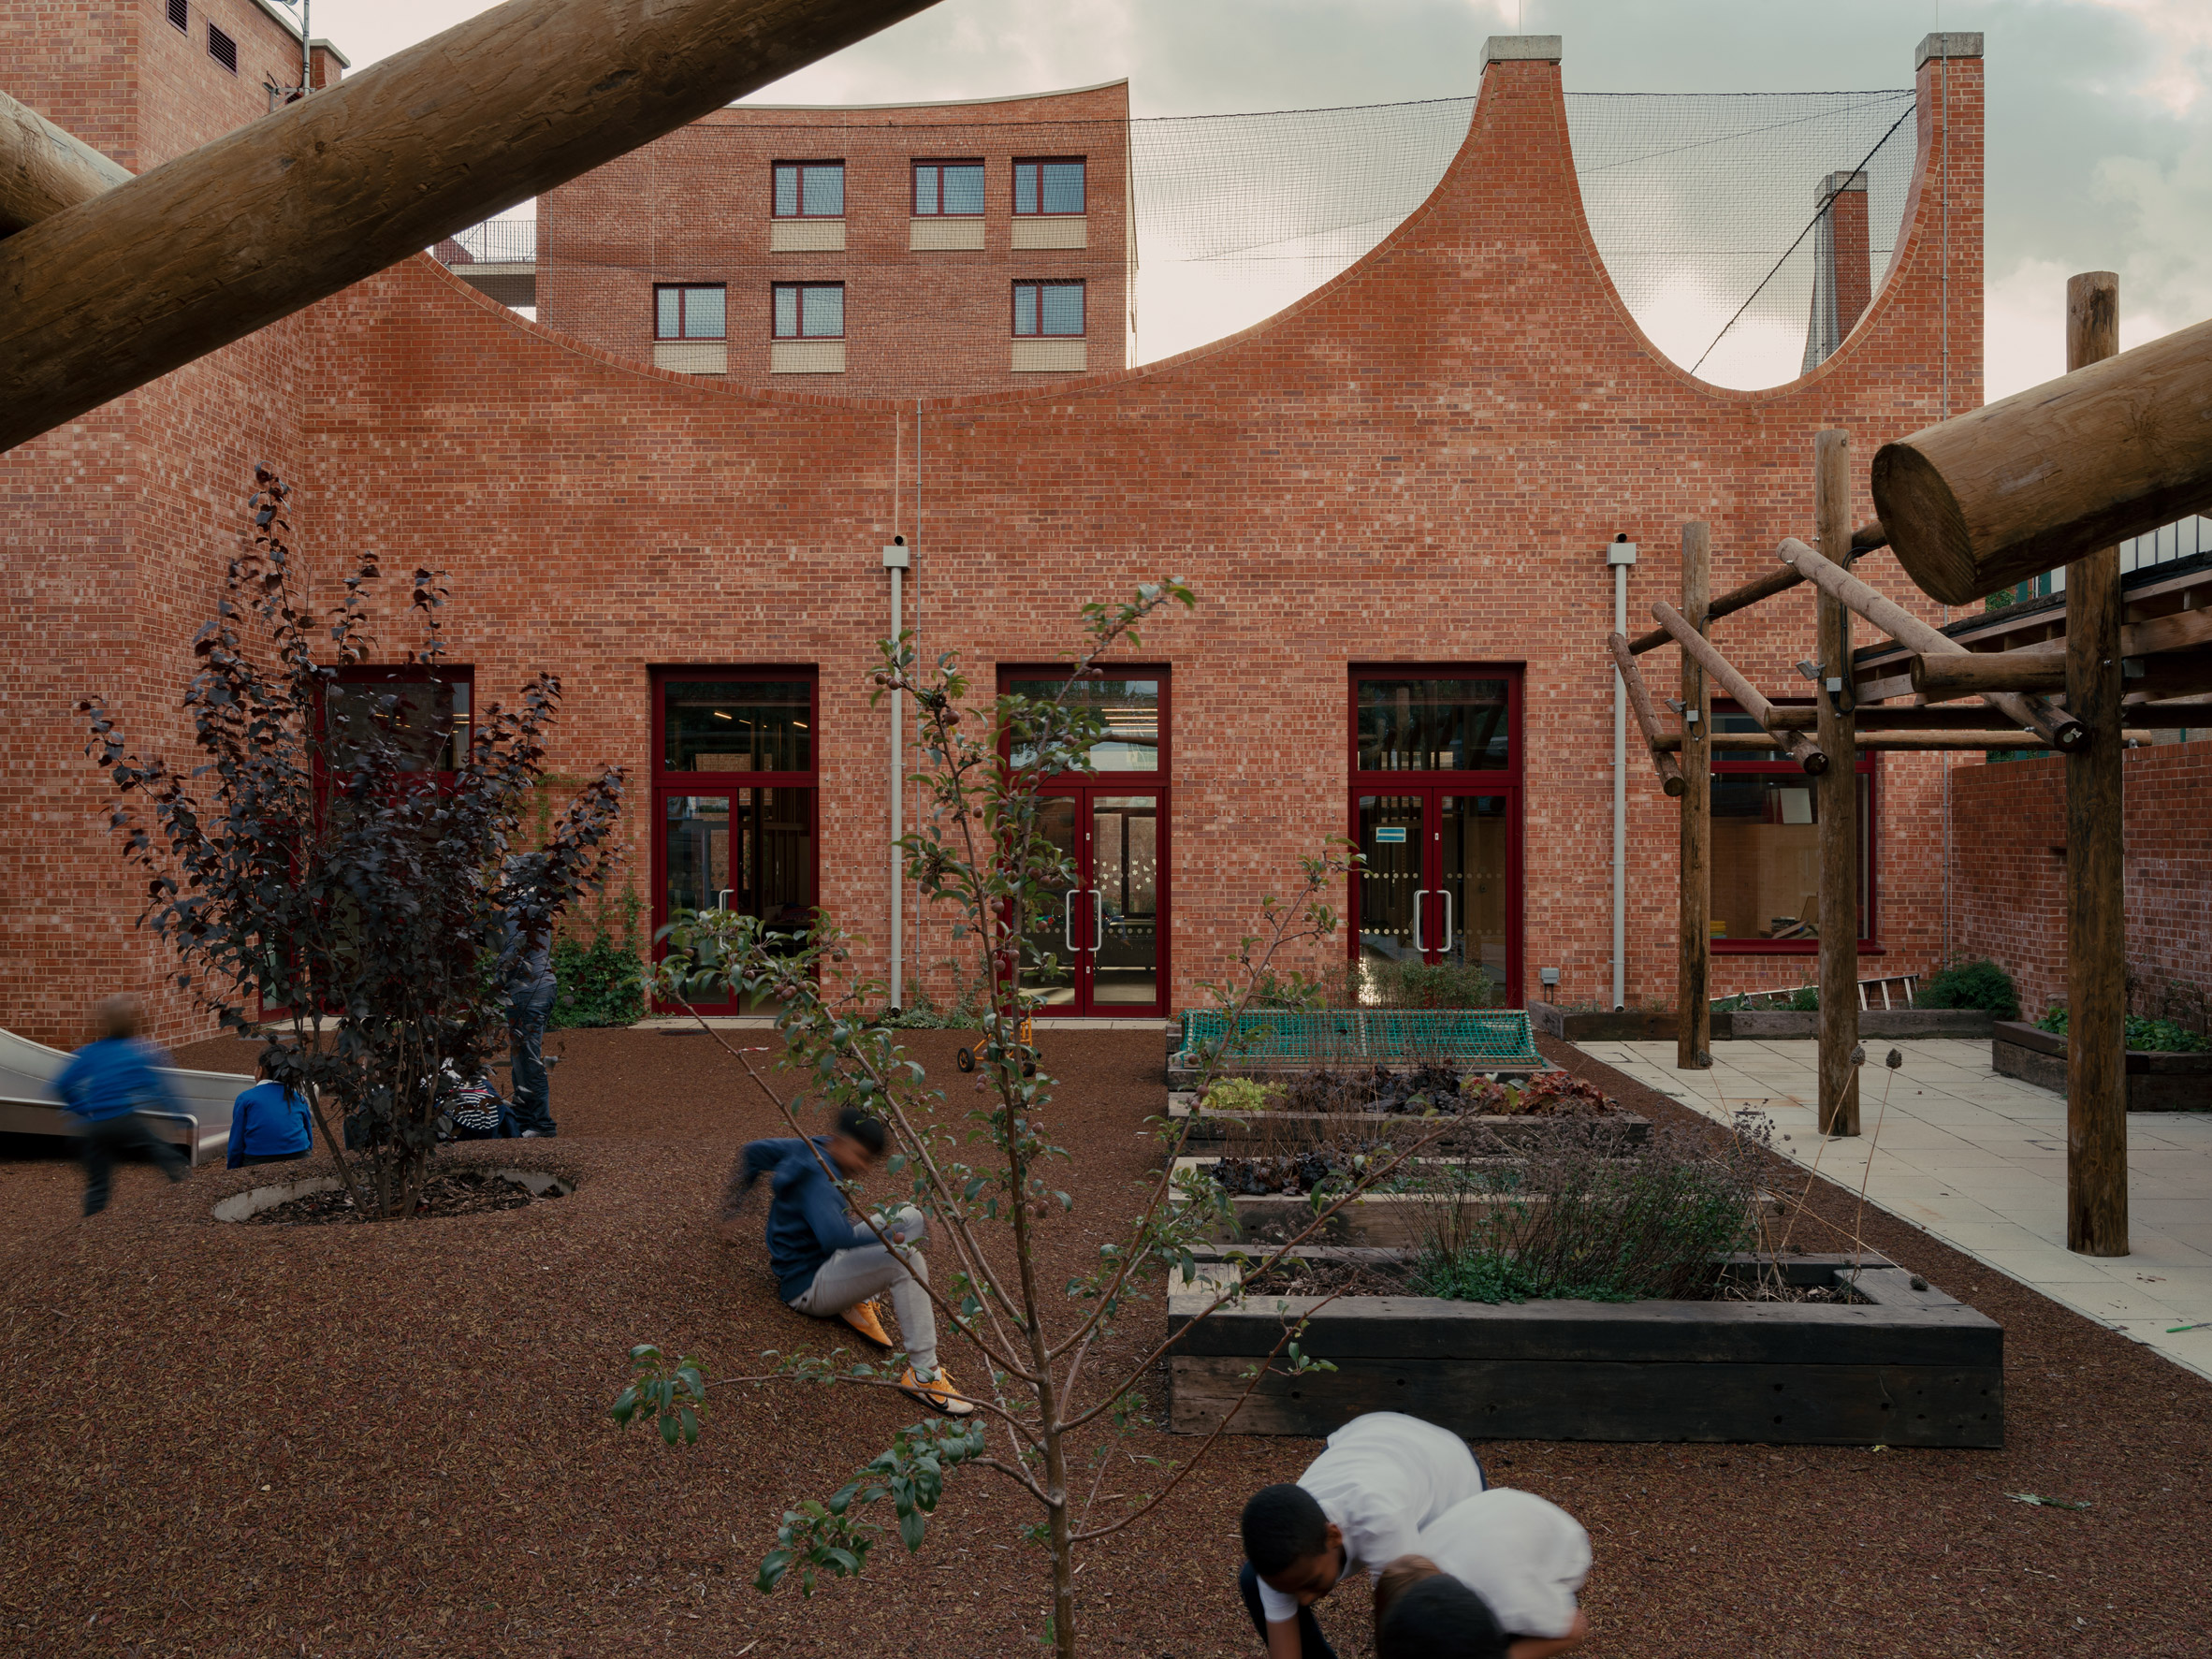 Central Somers Town children's centre by Adam Khan Architects